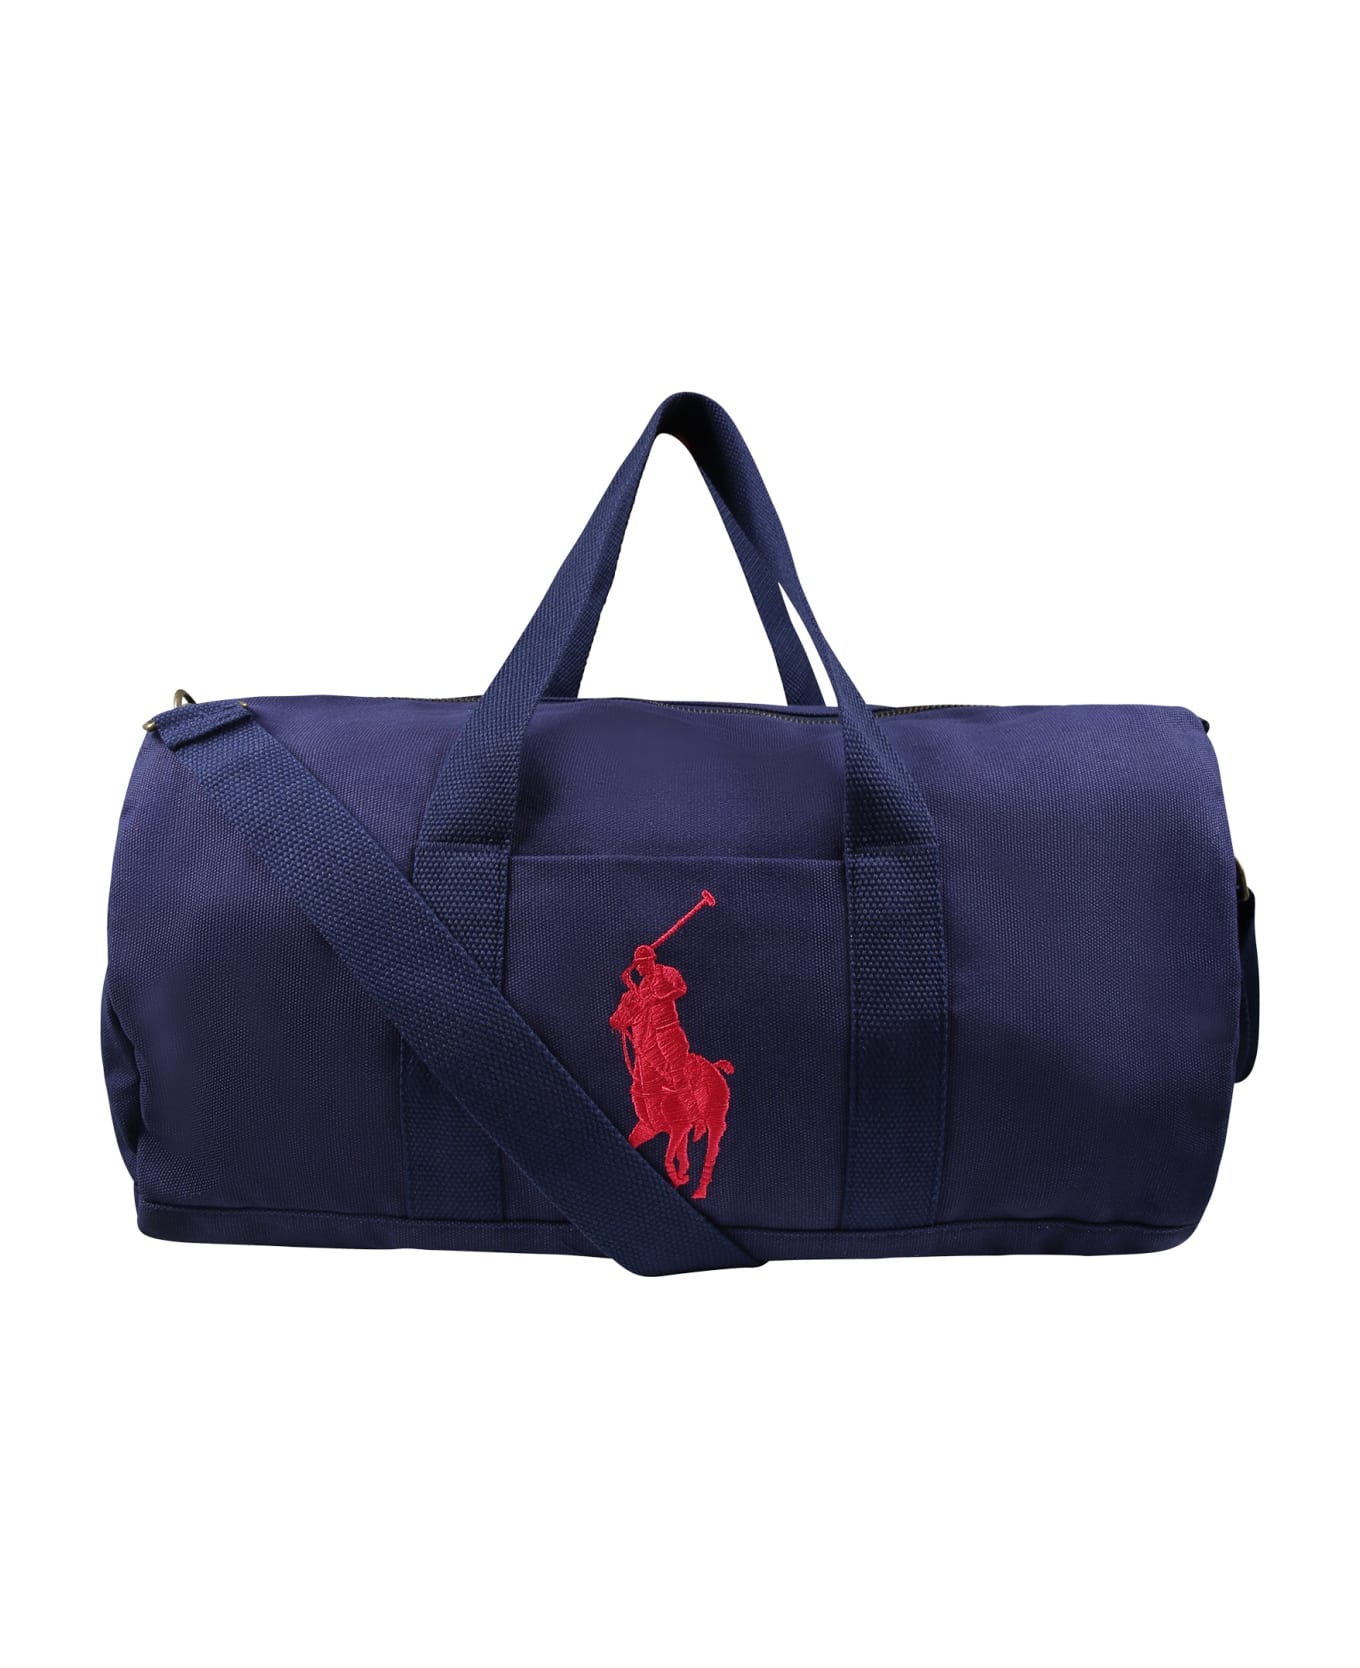 Ralph Lauren Blue Suitcase For Kids With Logo - Blue